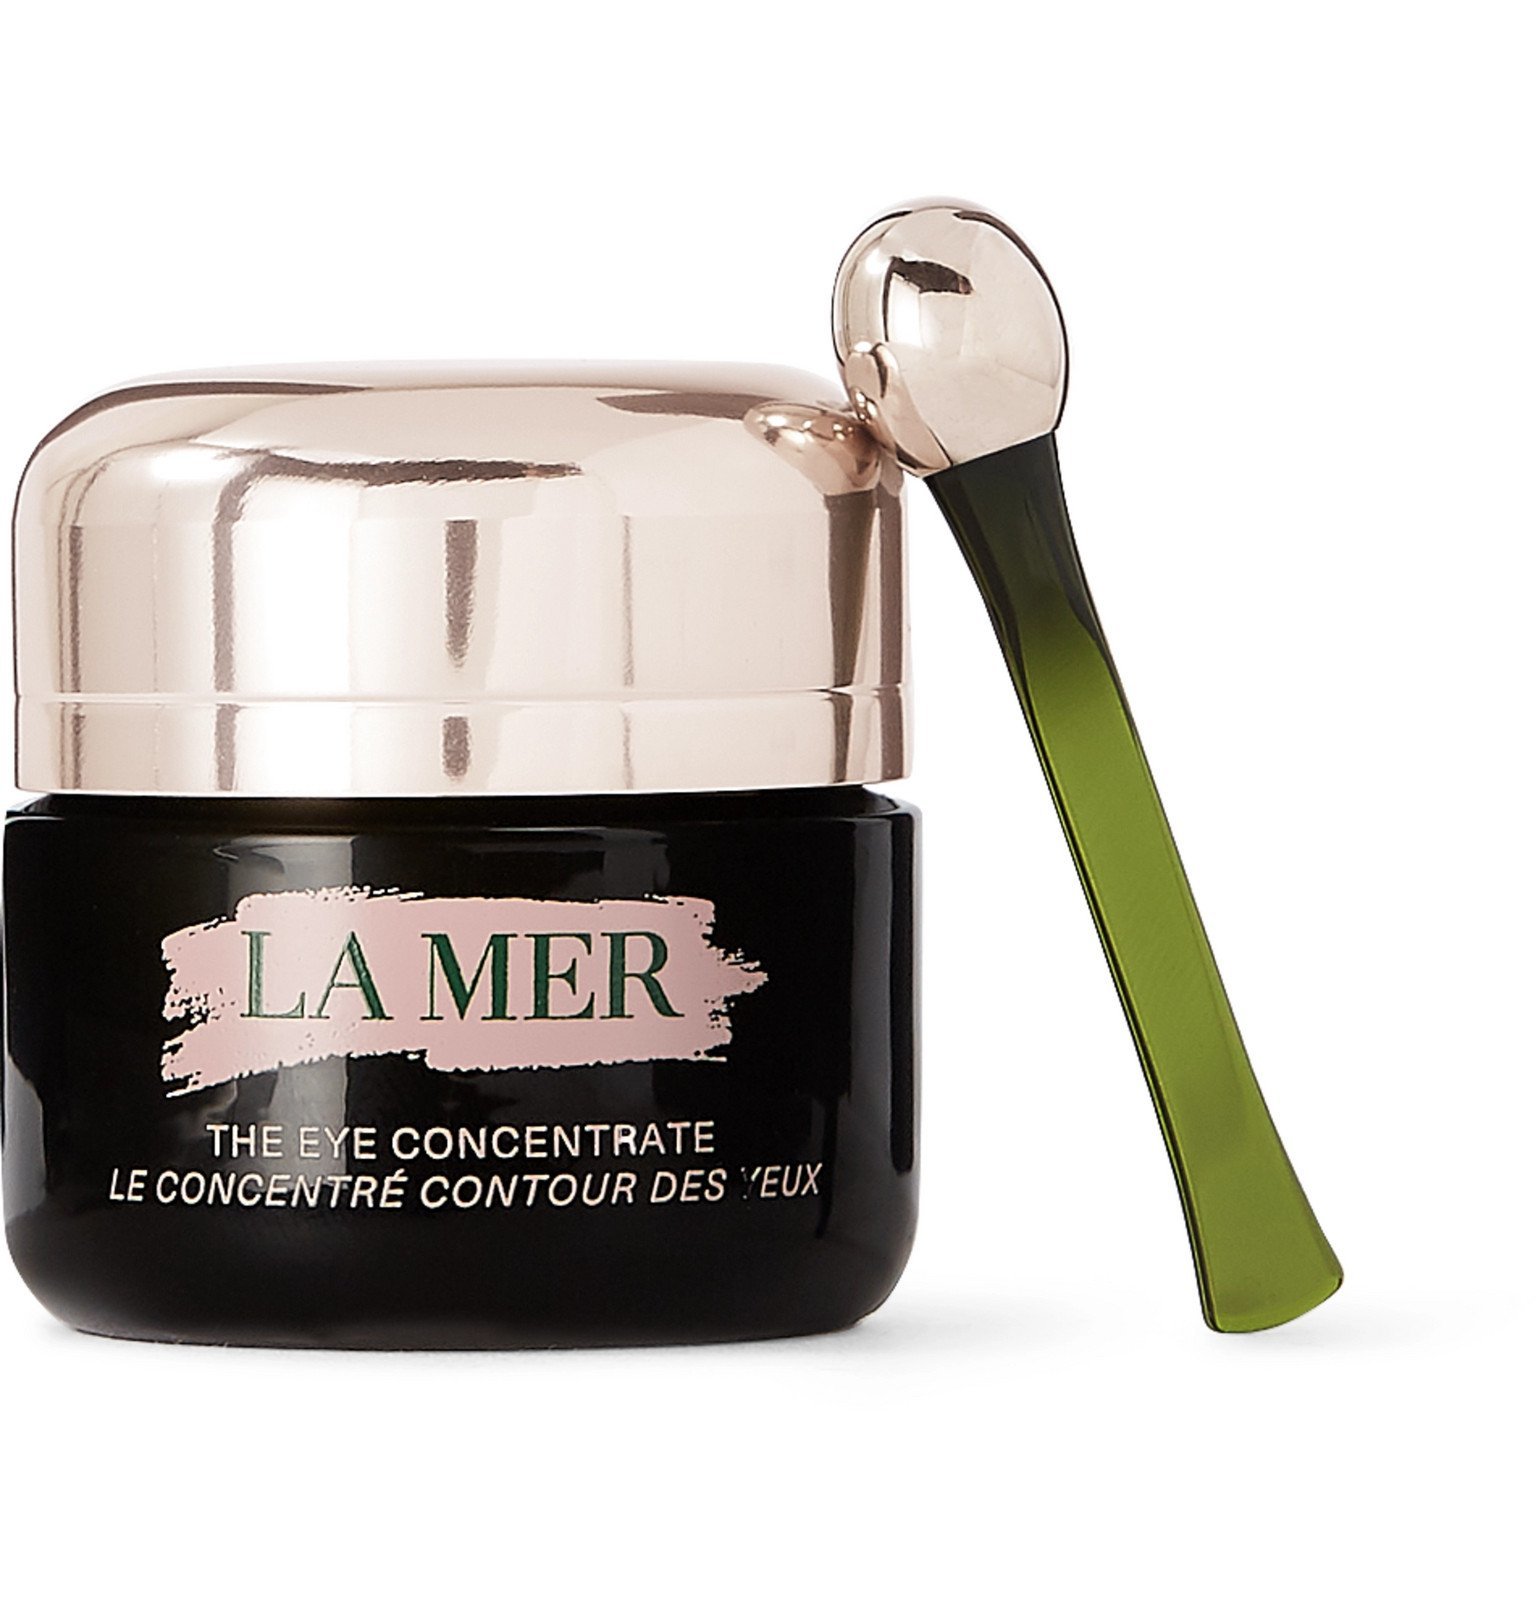 La Mer - The Eye Concentrate, 15ml - Colorless La Mer